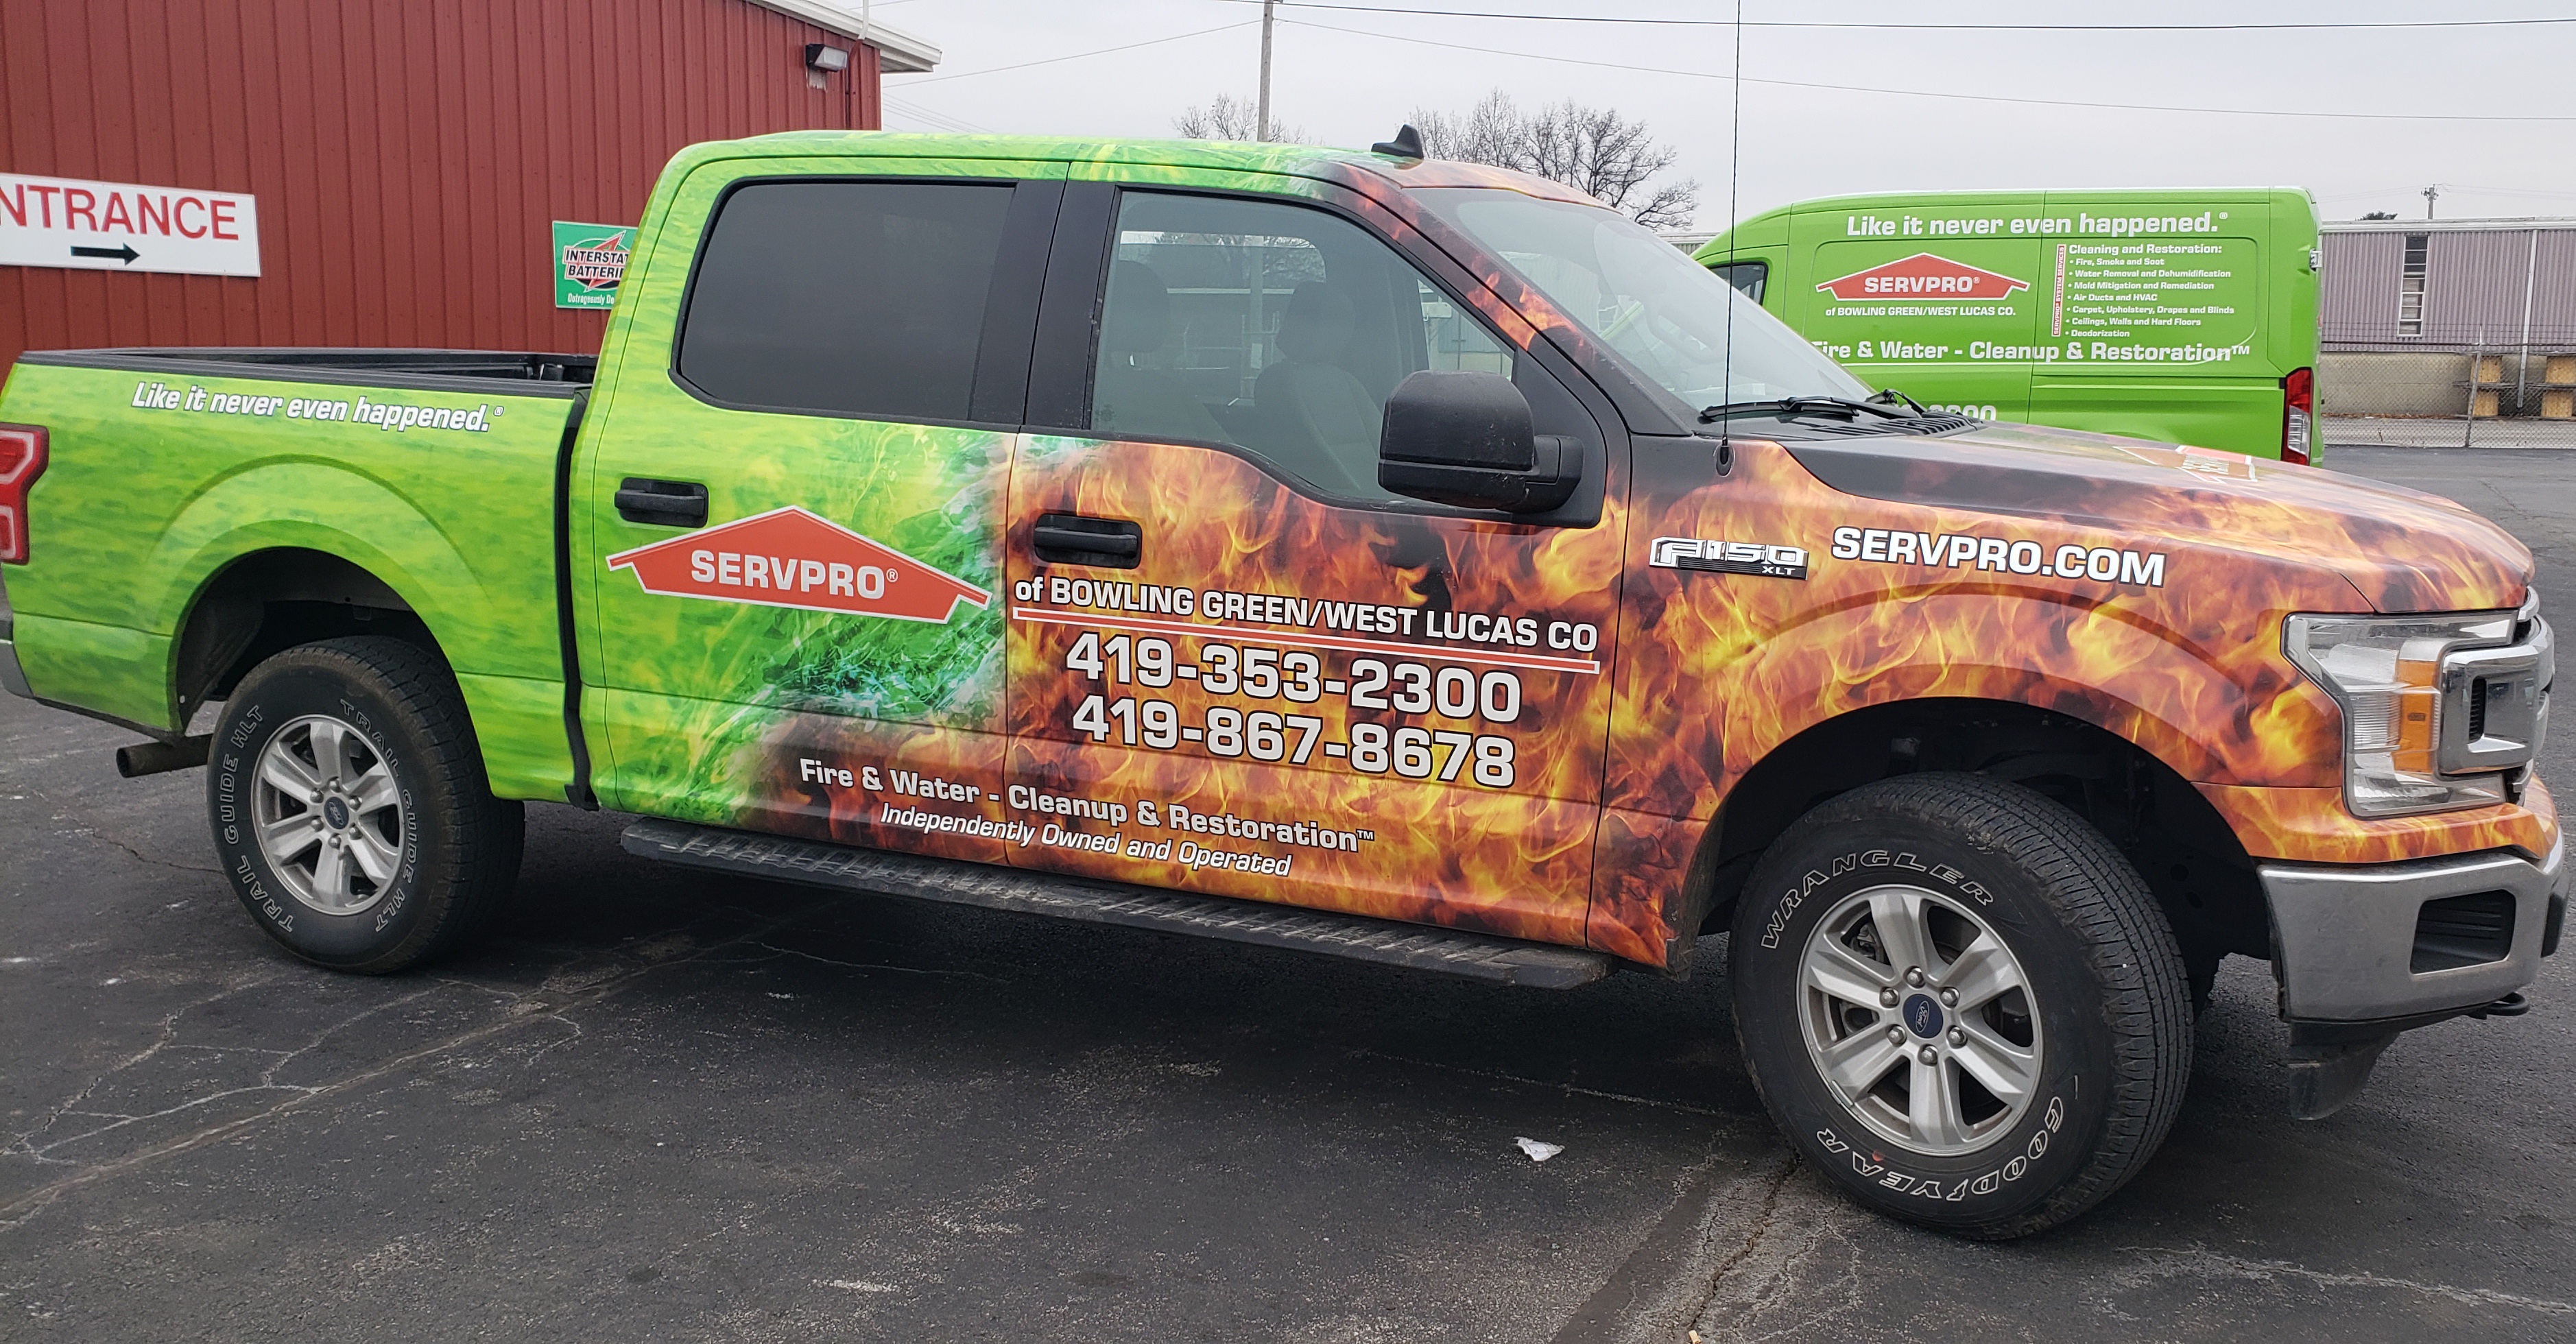 Image 3 | SERVPRO of Bowling Green/West Lucas County